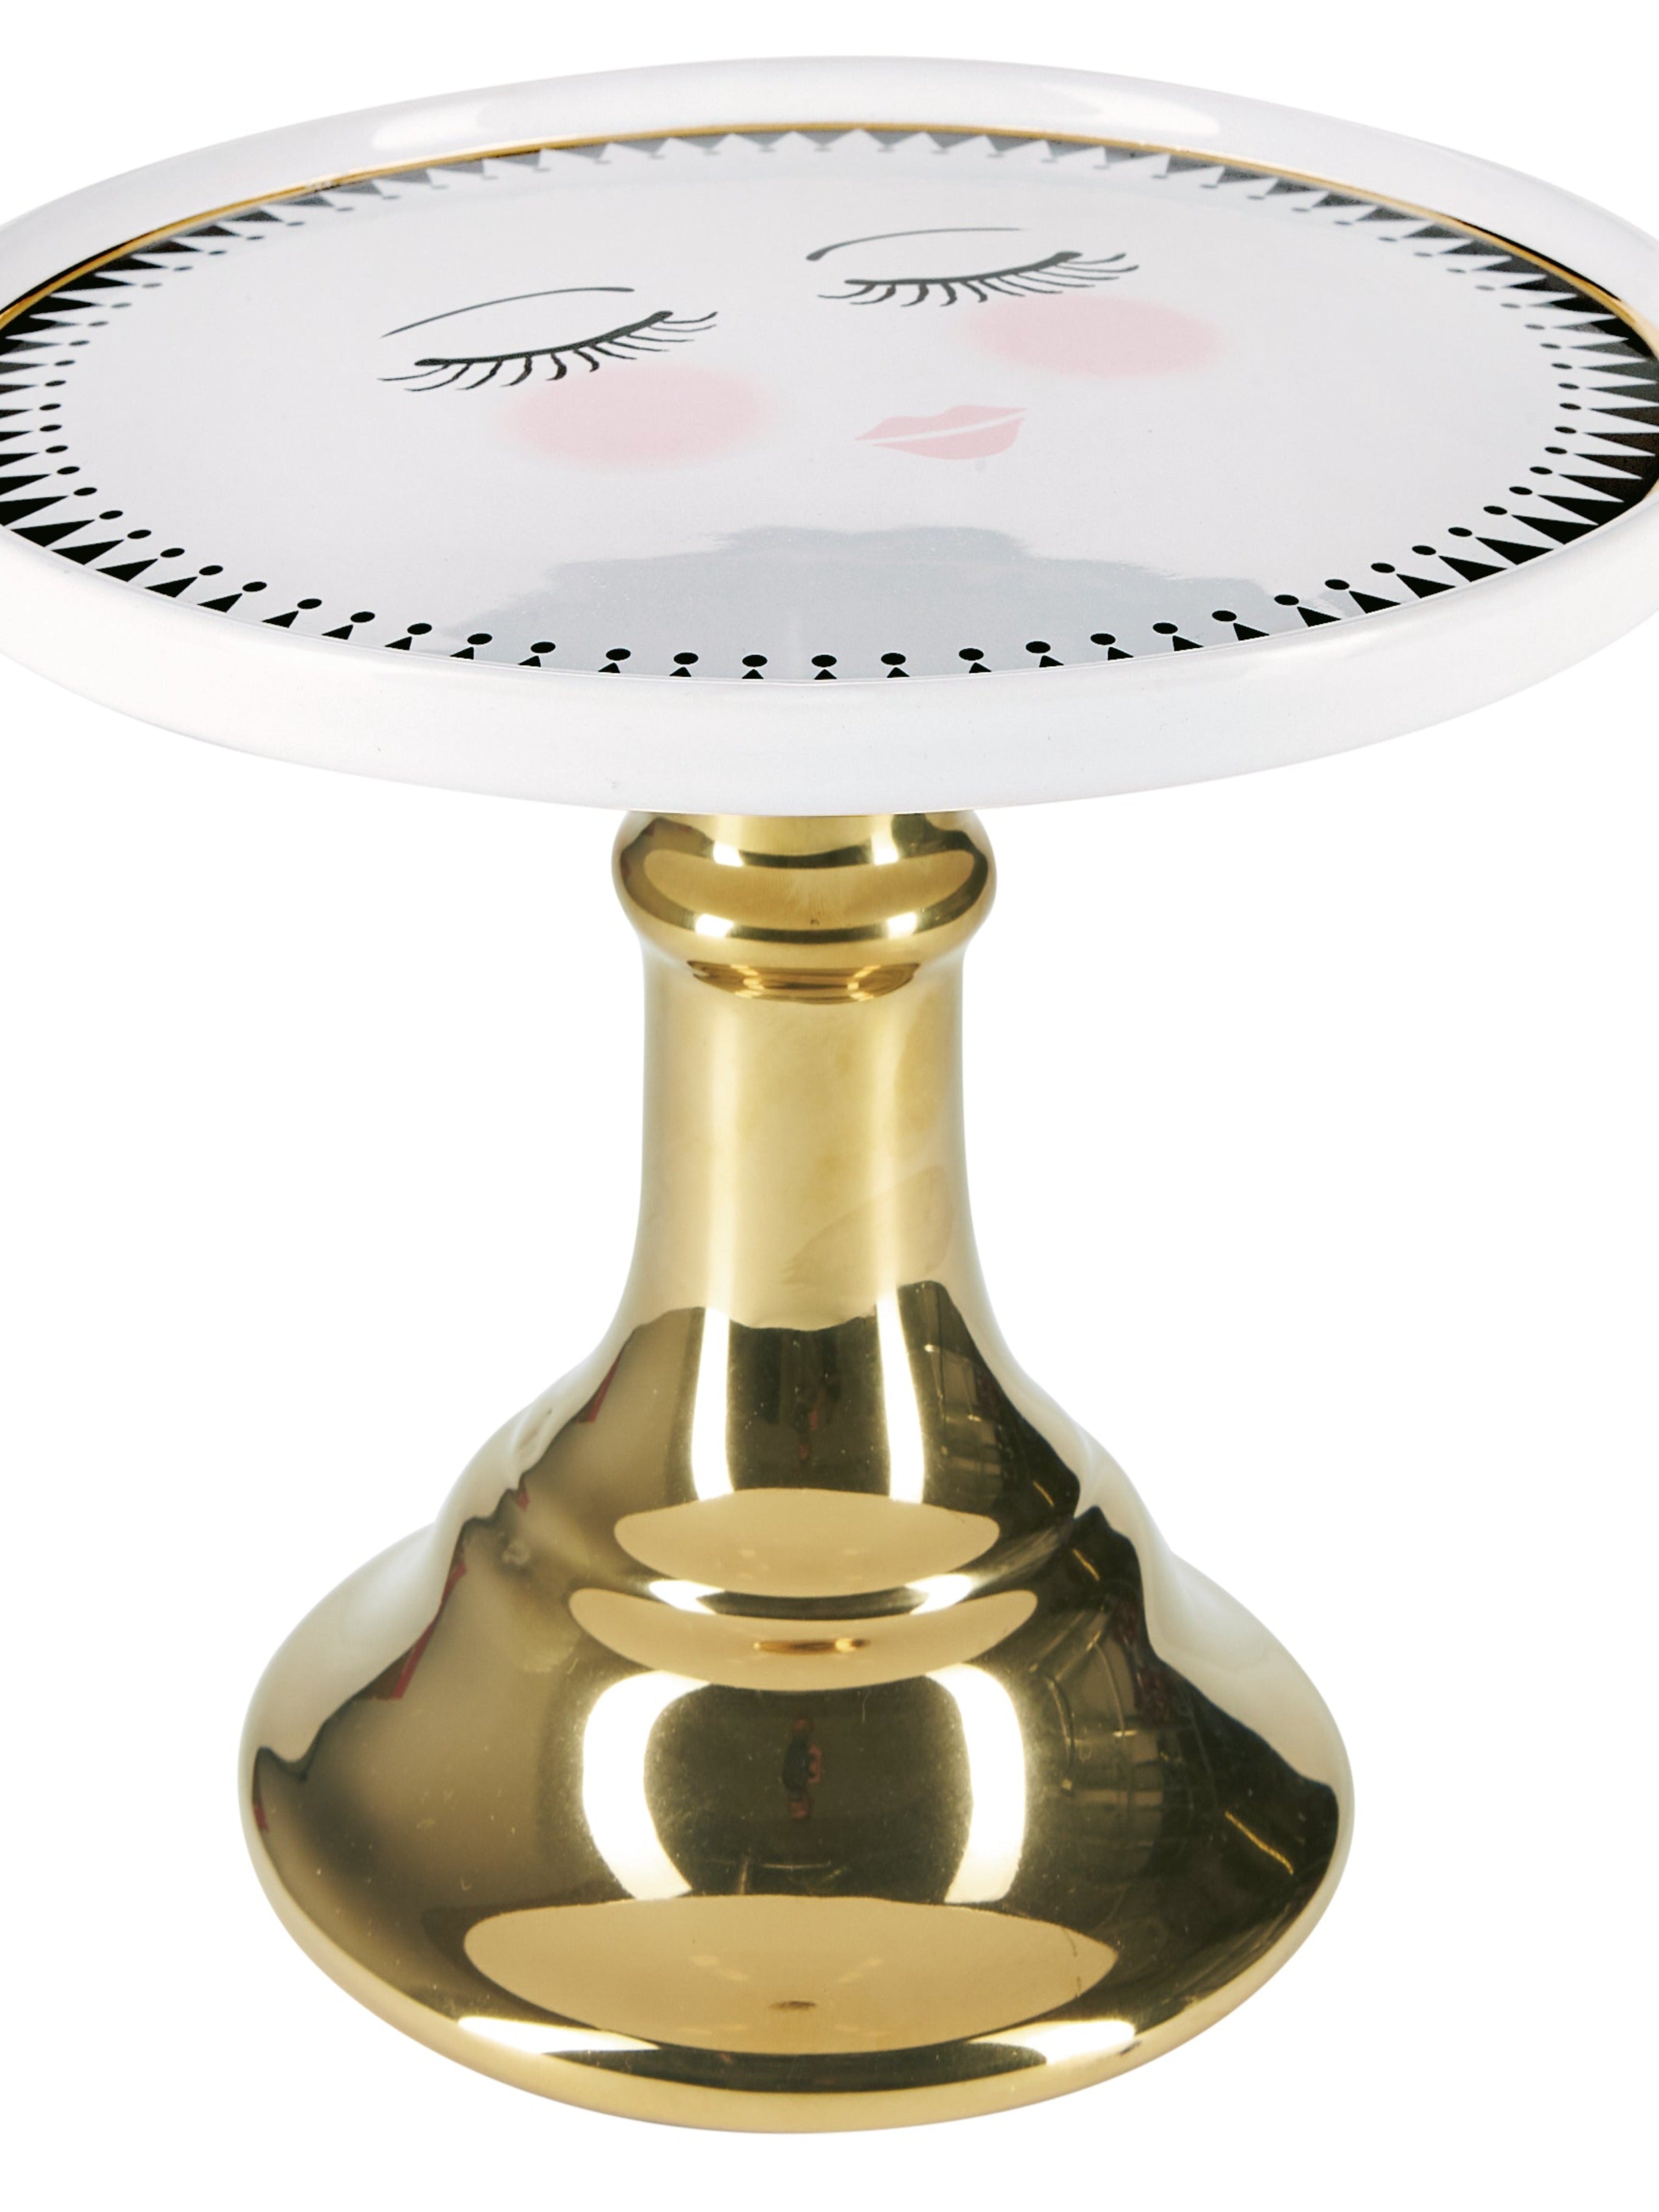 Miss Etoile Closed Eyes Cake Stand with Gold Base